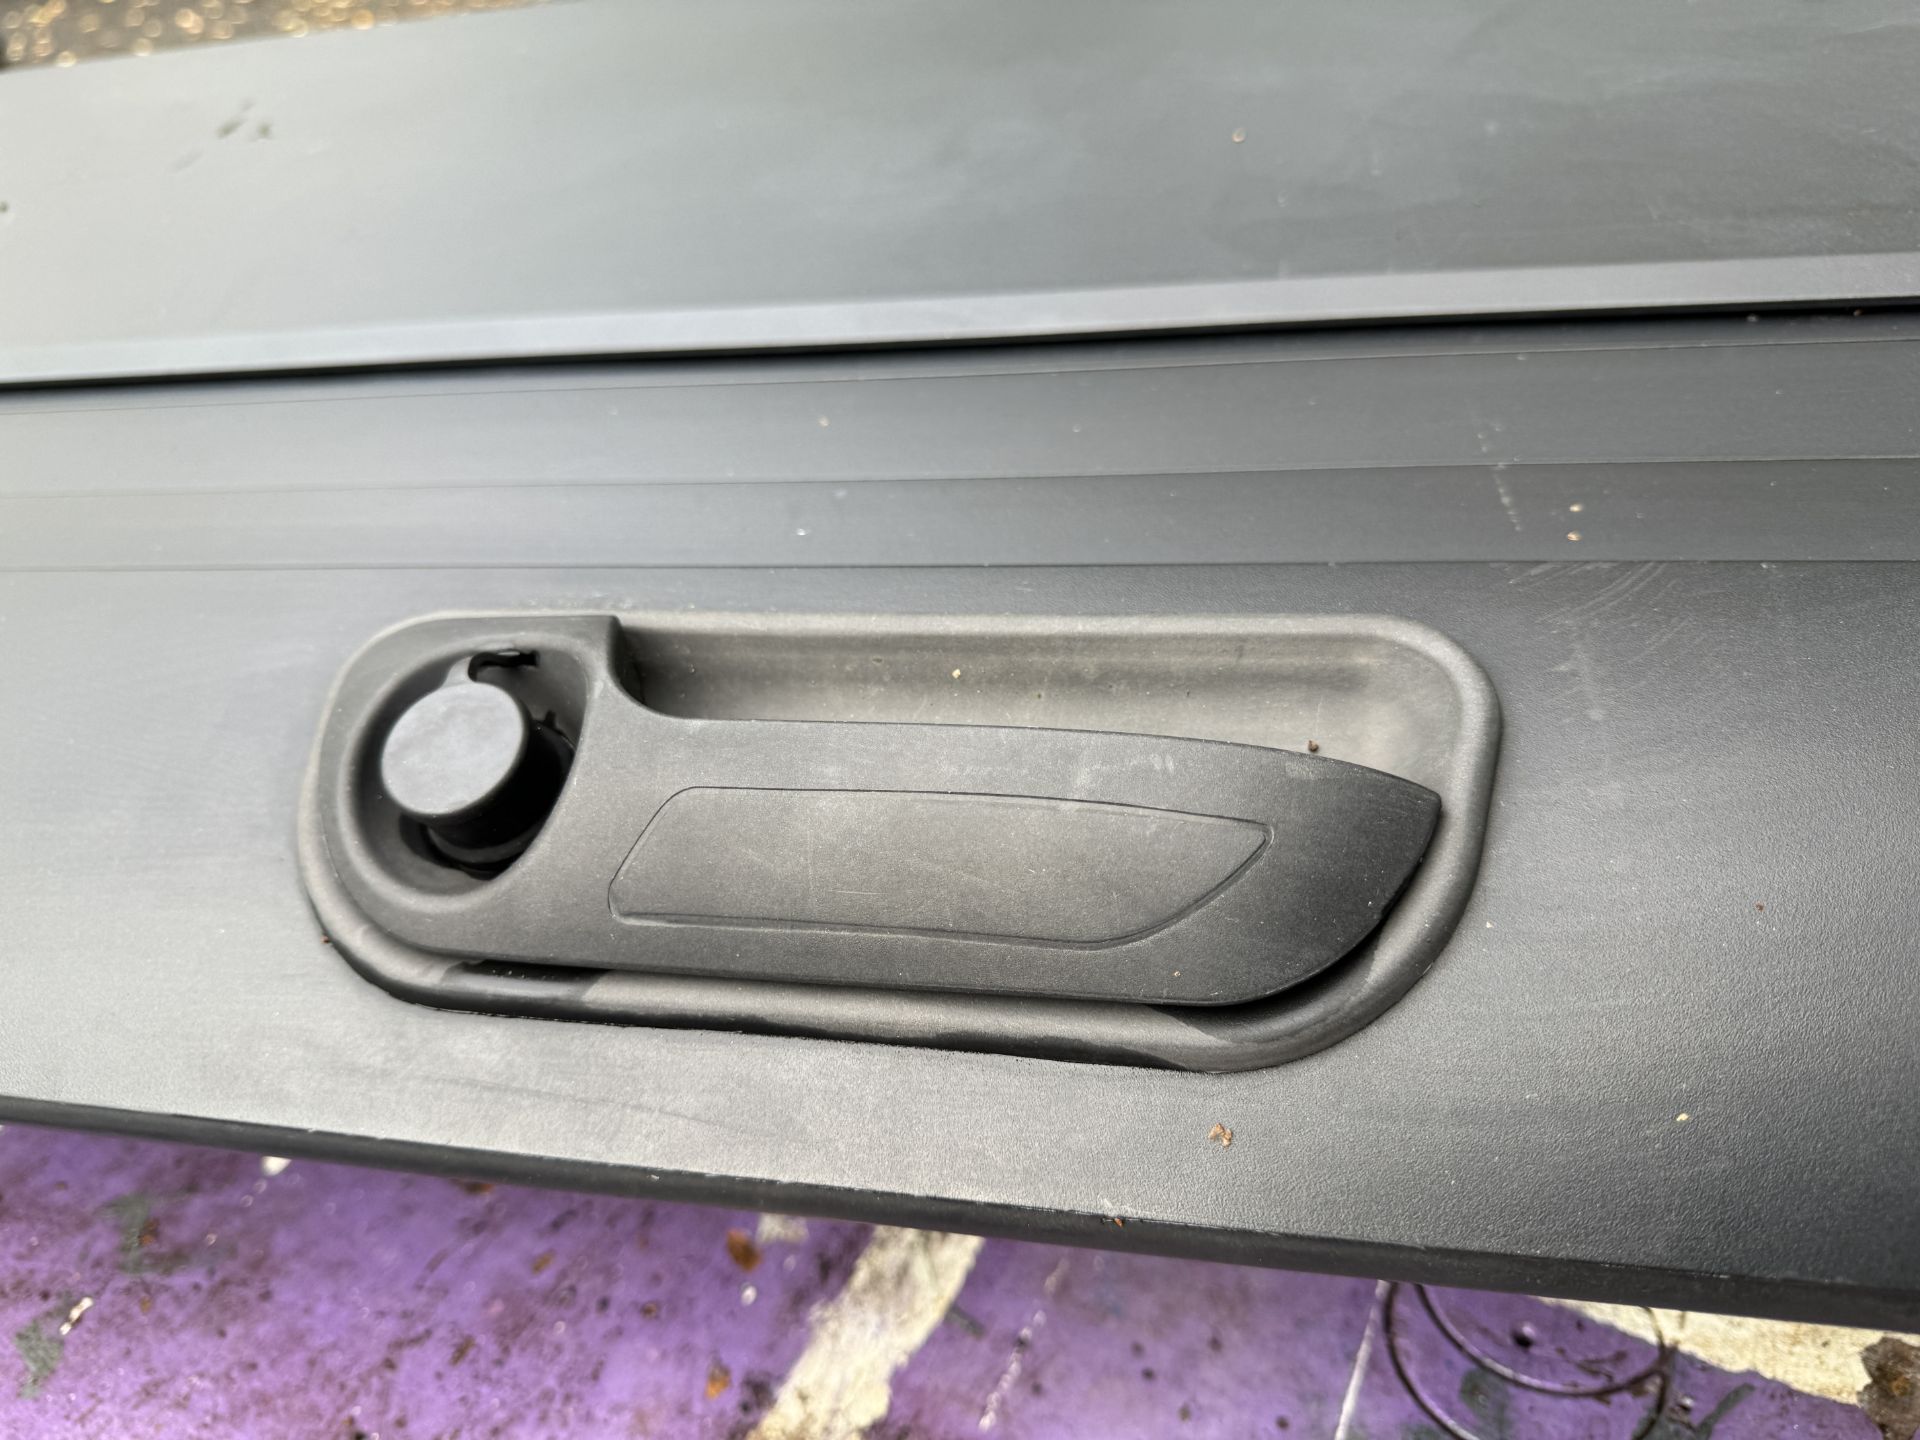 Genuine Ford Ranger Black Roller Tonneau Cover with Parts & Fixings as Shown - Further Details to be - Image 17 of 43